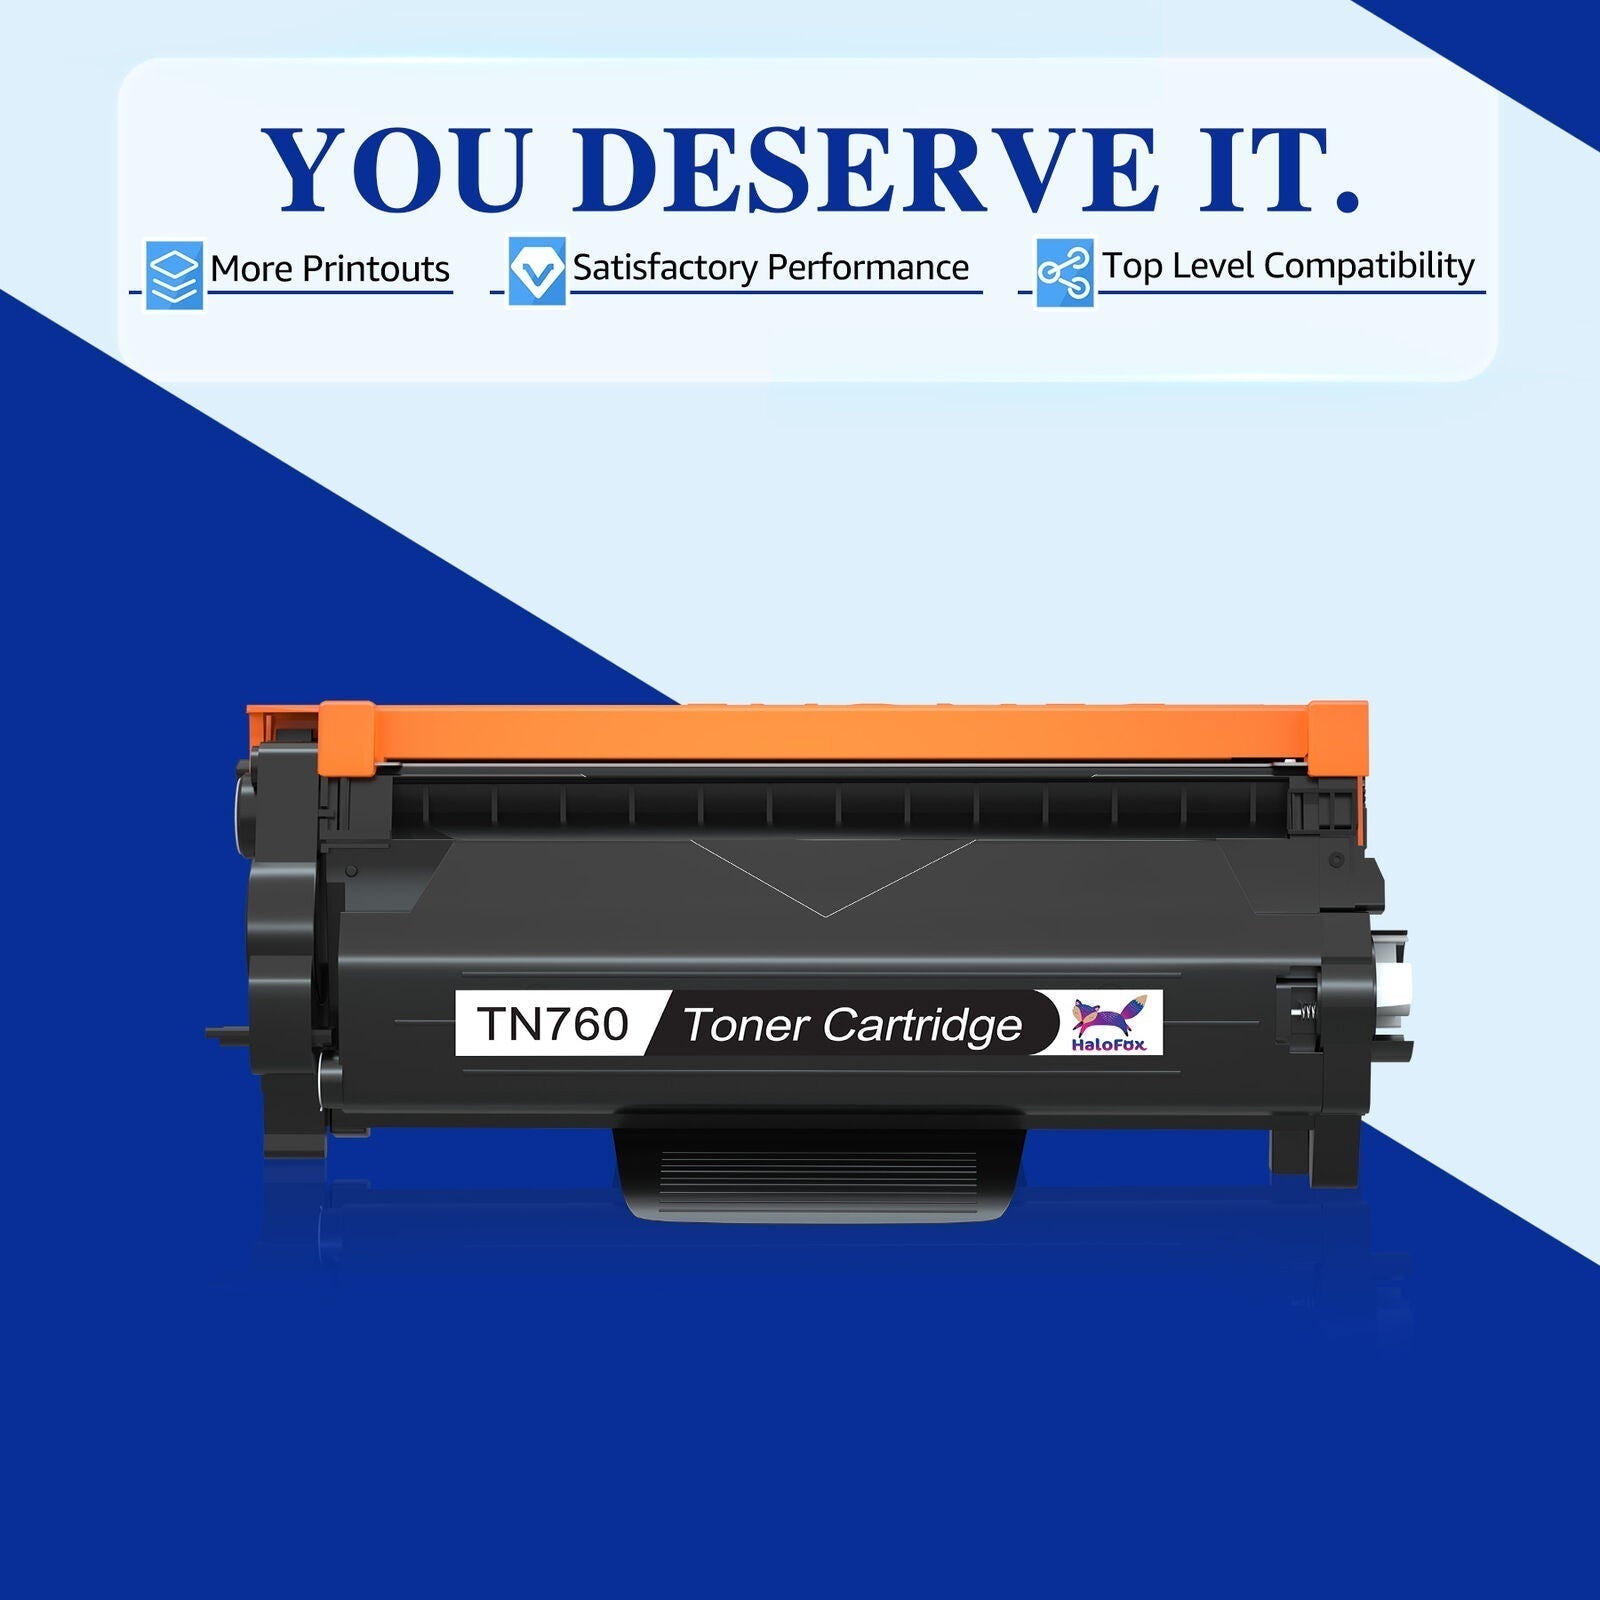 HaloFox Compatible Toner for Brother TN760 TN-760 (Black,1-Pack)